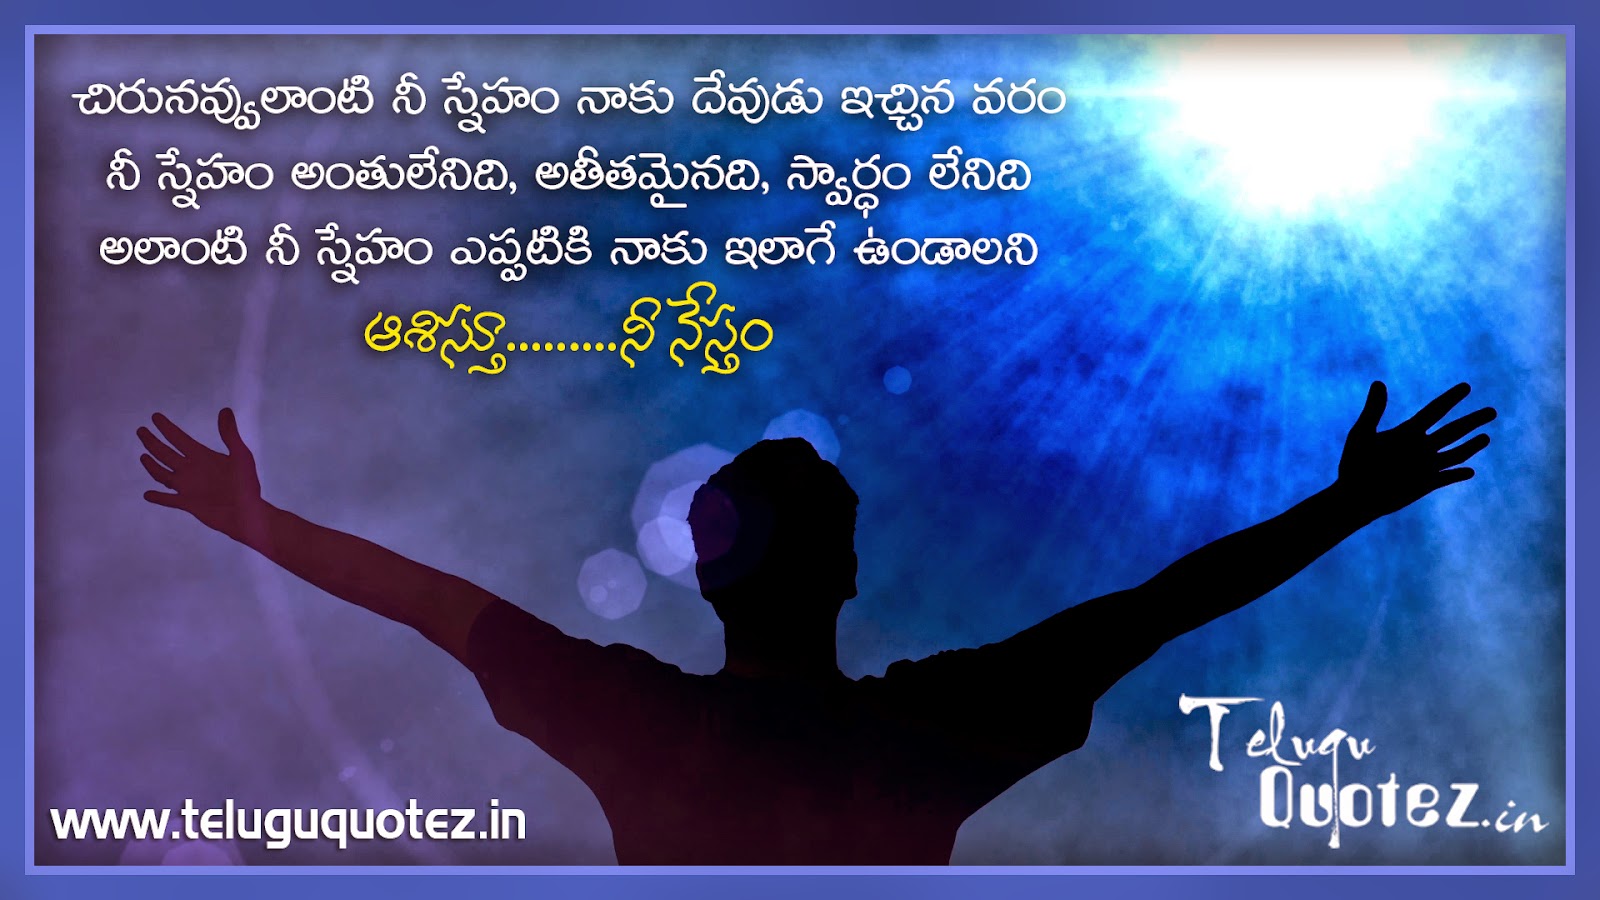 Best saying telugu friendship quotes HD images | naveengfx